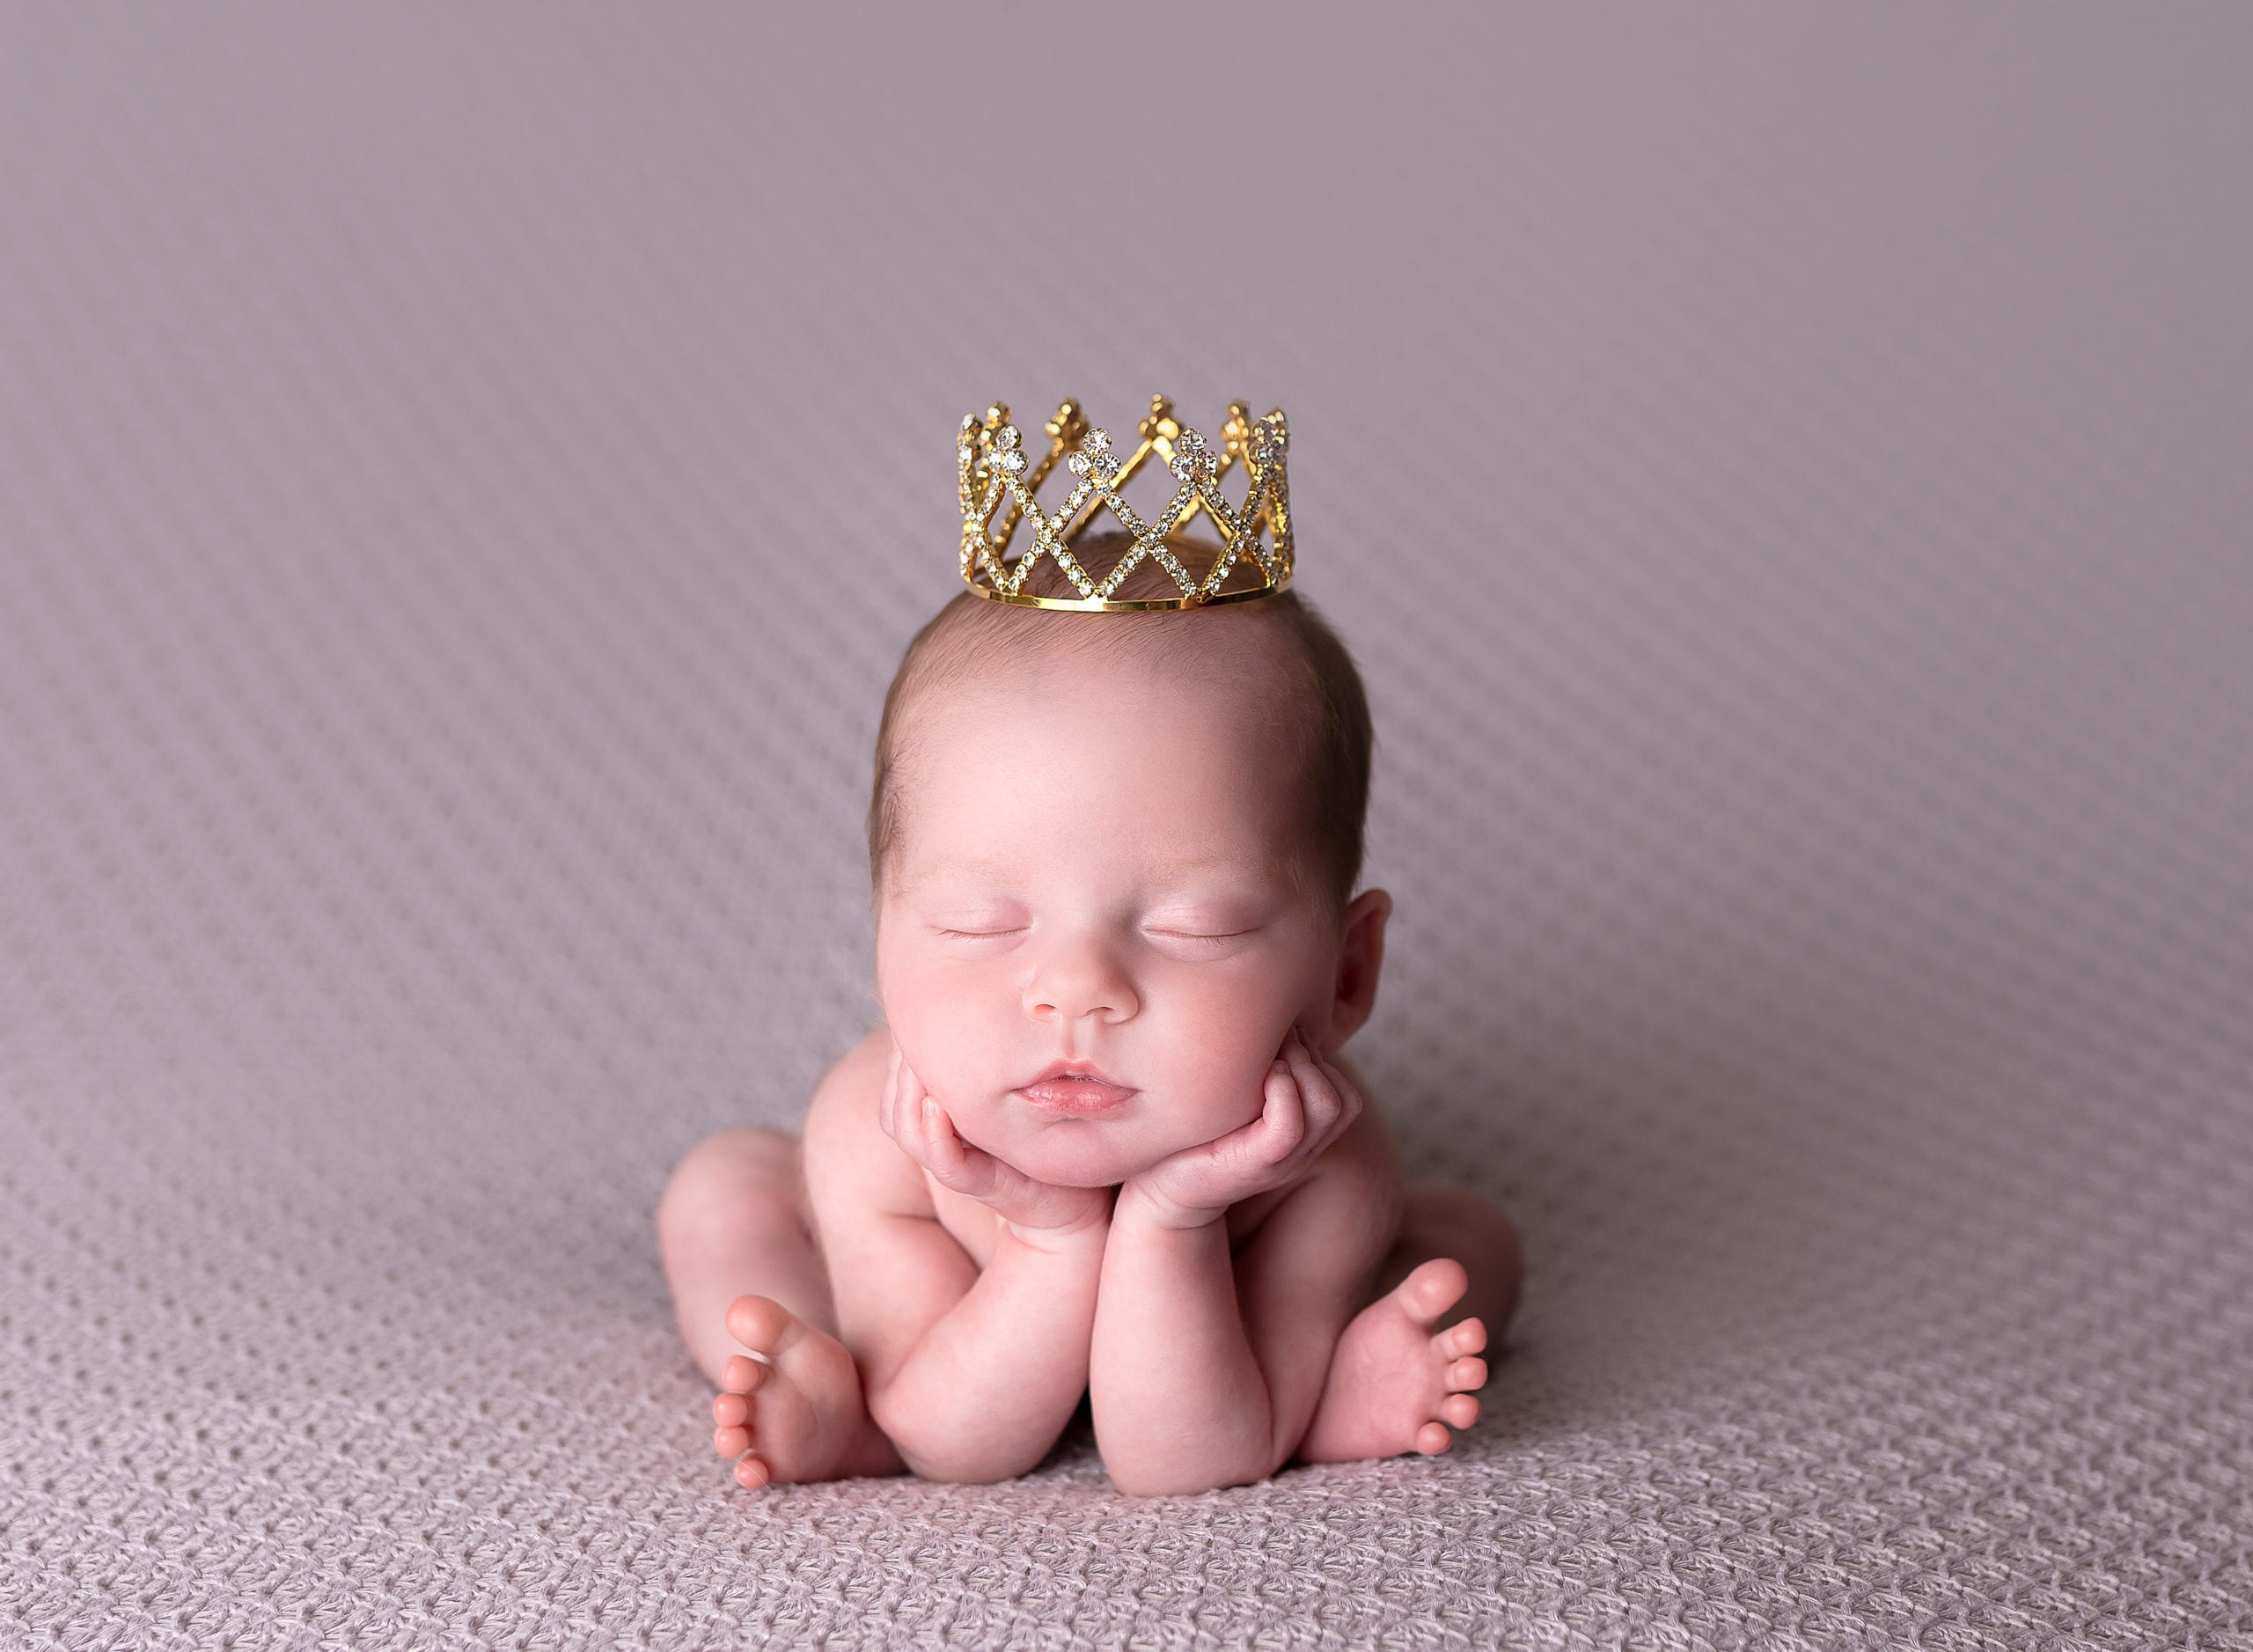 A princess newborn in the froggy pose.